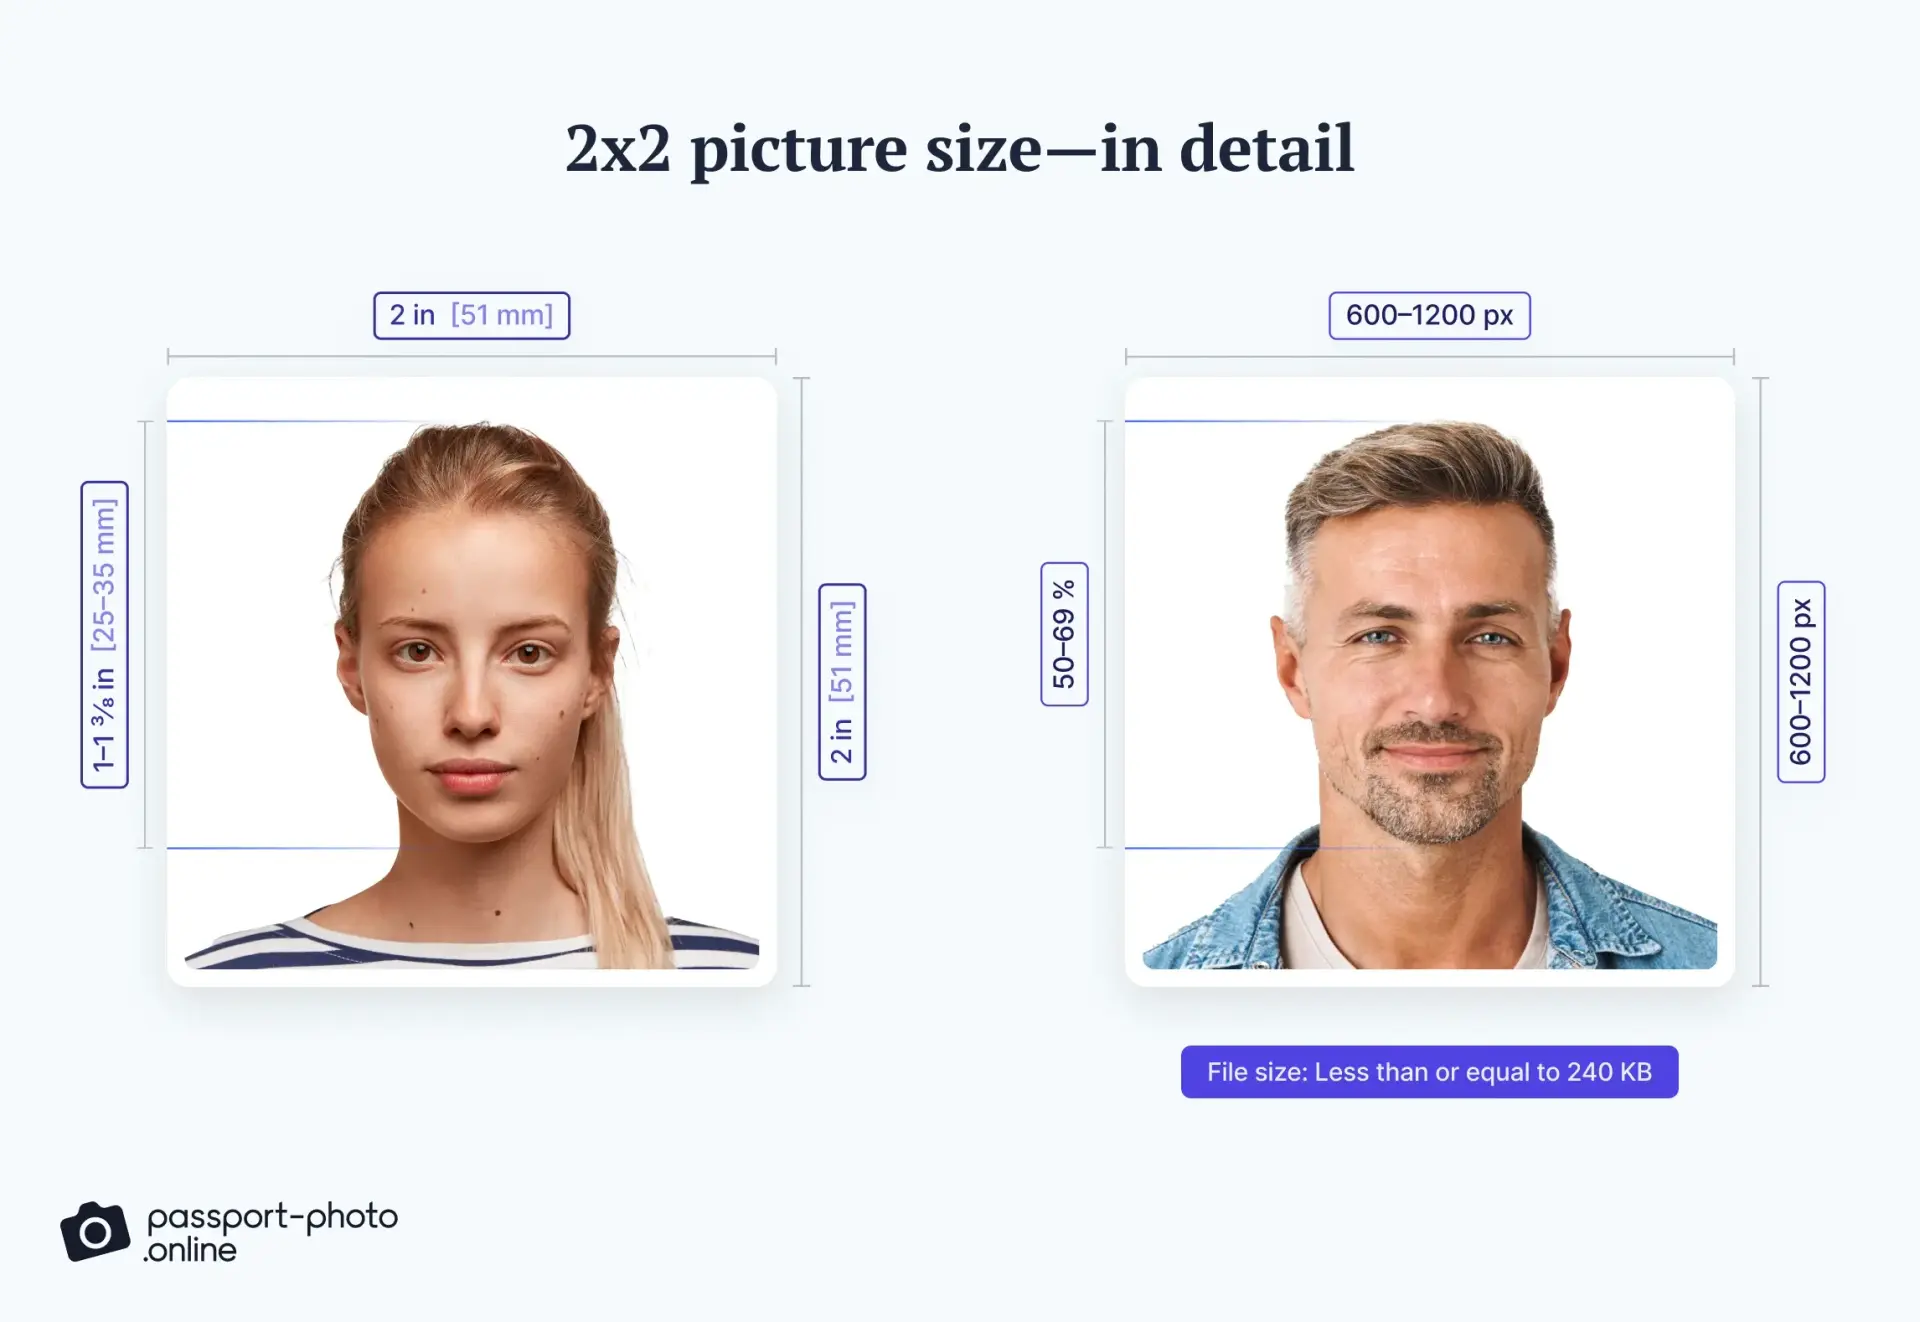 Picture representations of correct 2x2 sizing specifications, including head size and pixel limits.